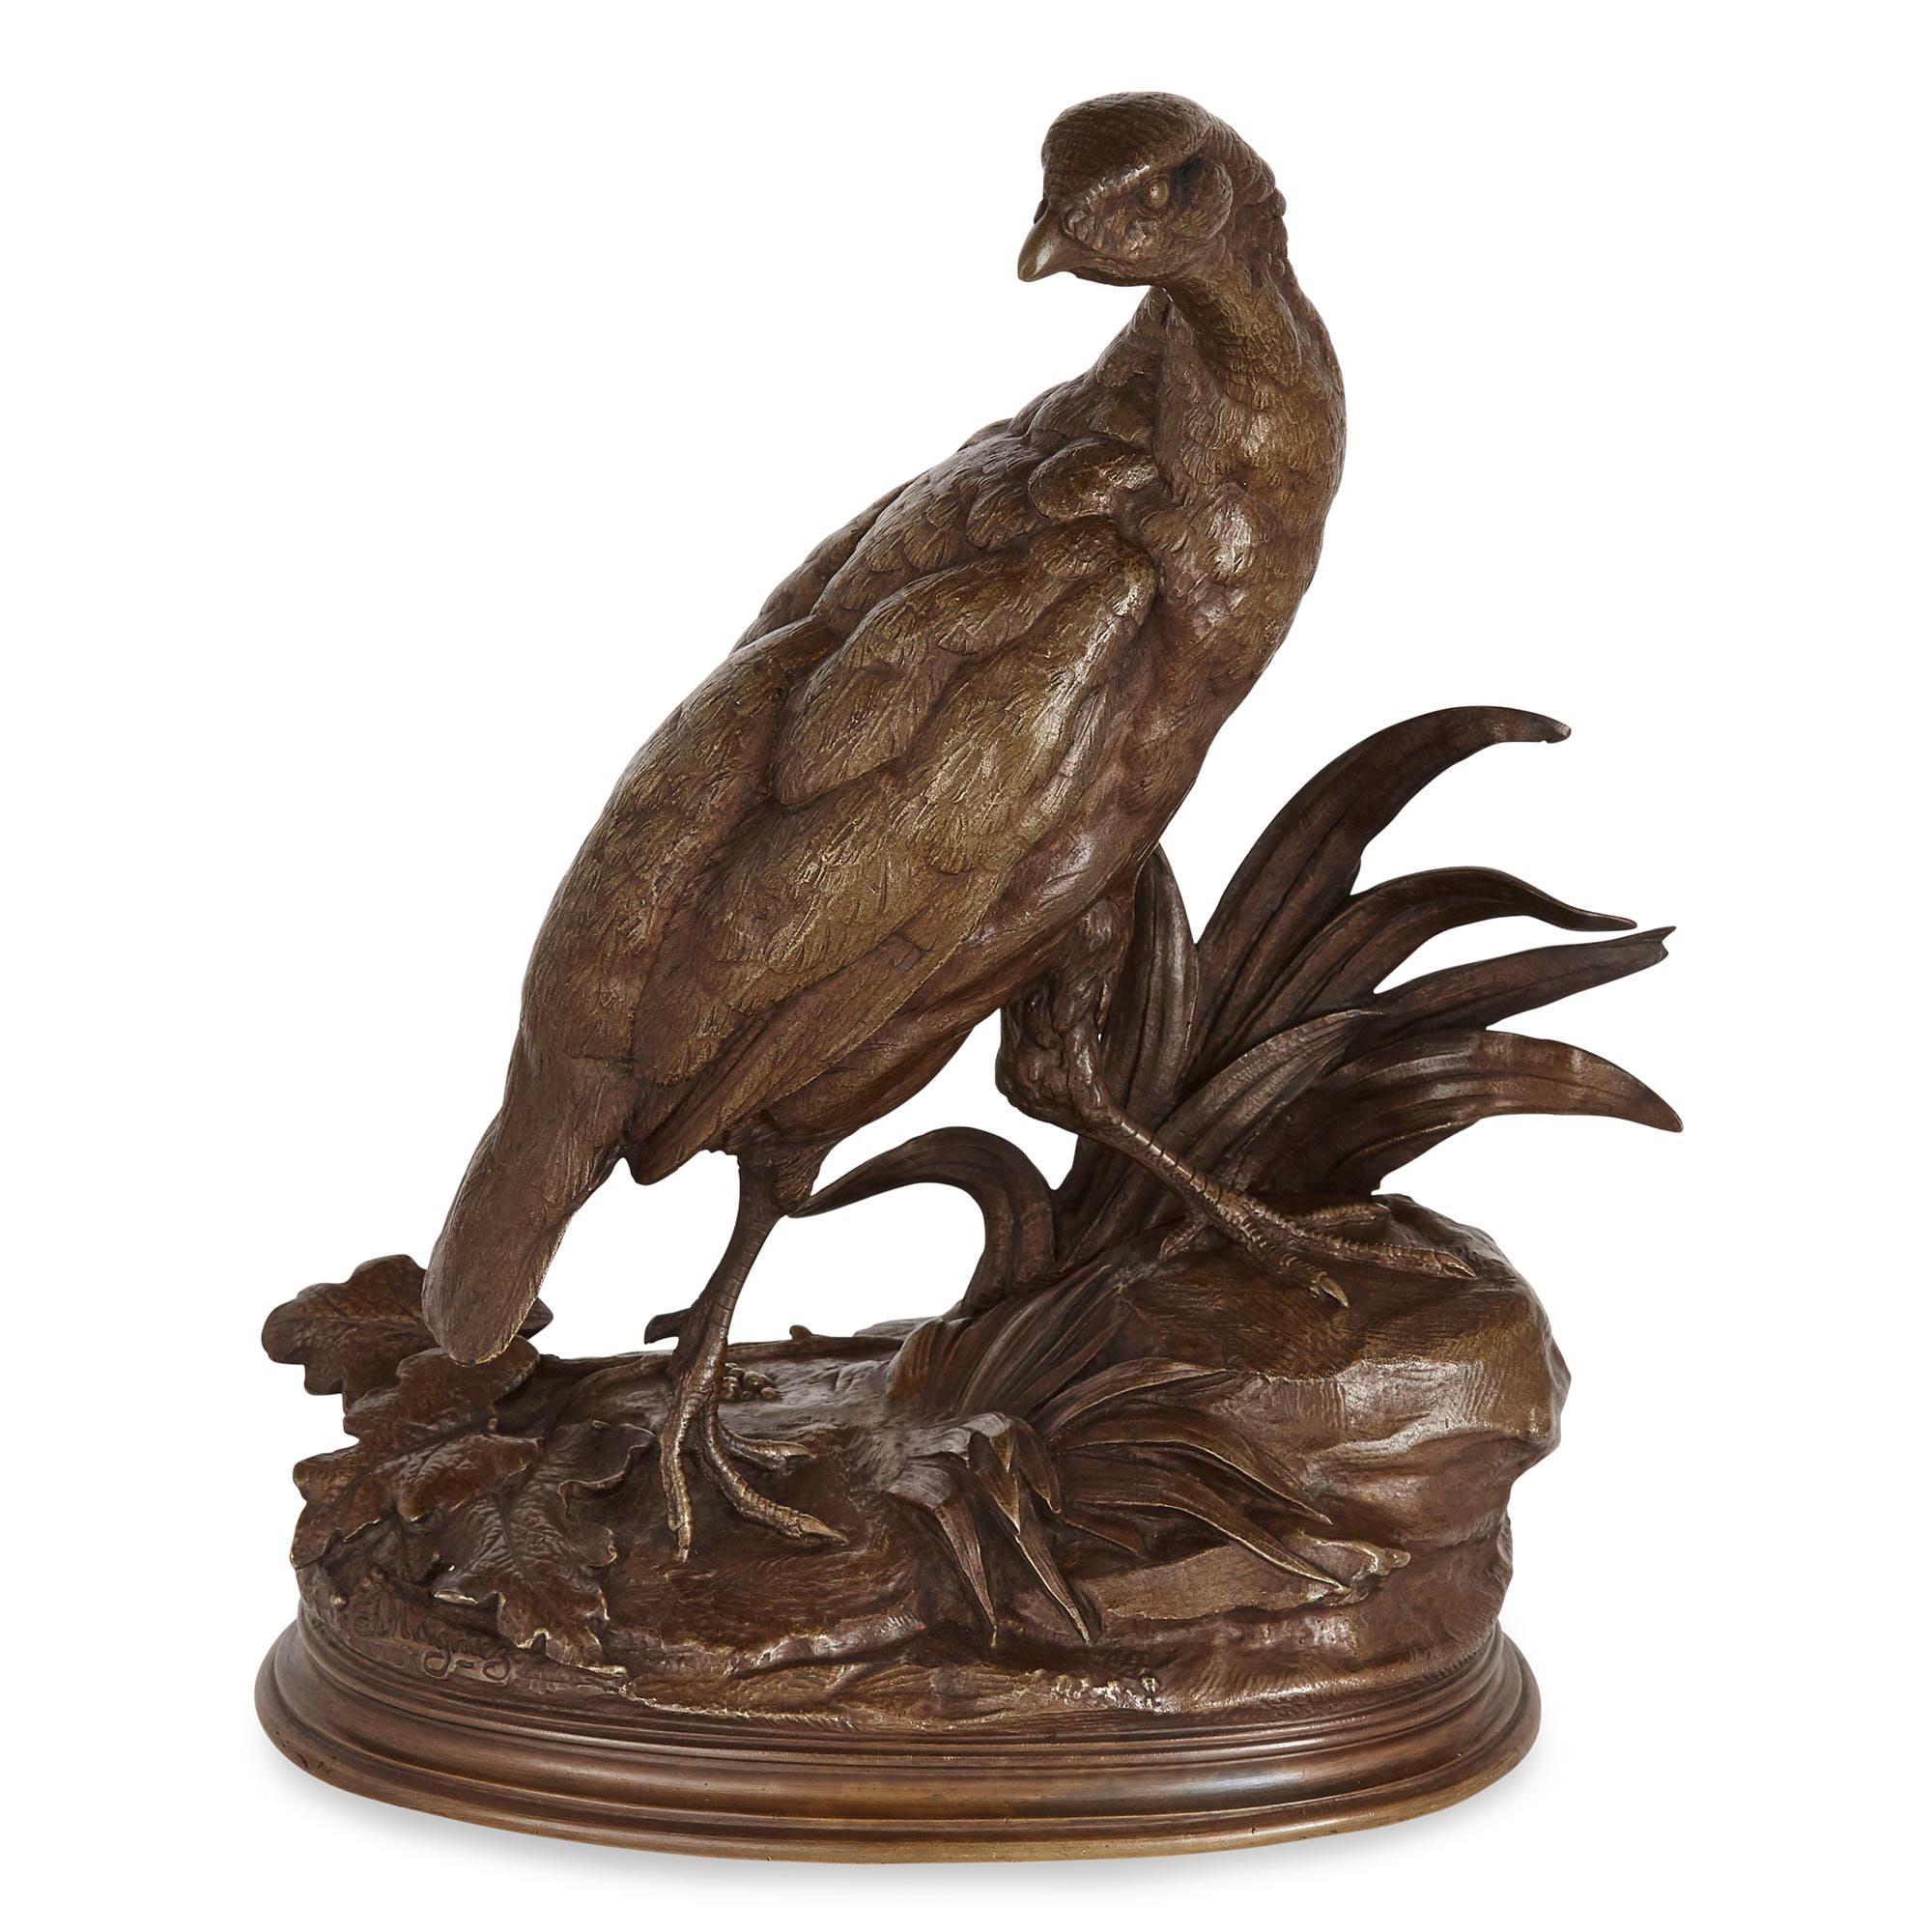 Each bird in this pair is a partridge—the ubiquitous European game bird. The partridges are cast from bronze and are finished with a beautiful, polychrome patina. Each partridge in the pair stands on its own base, which is littered with leaves and